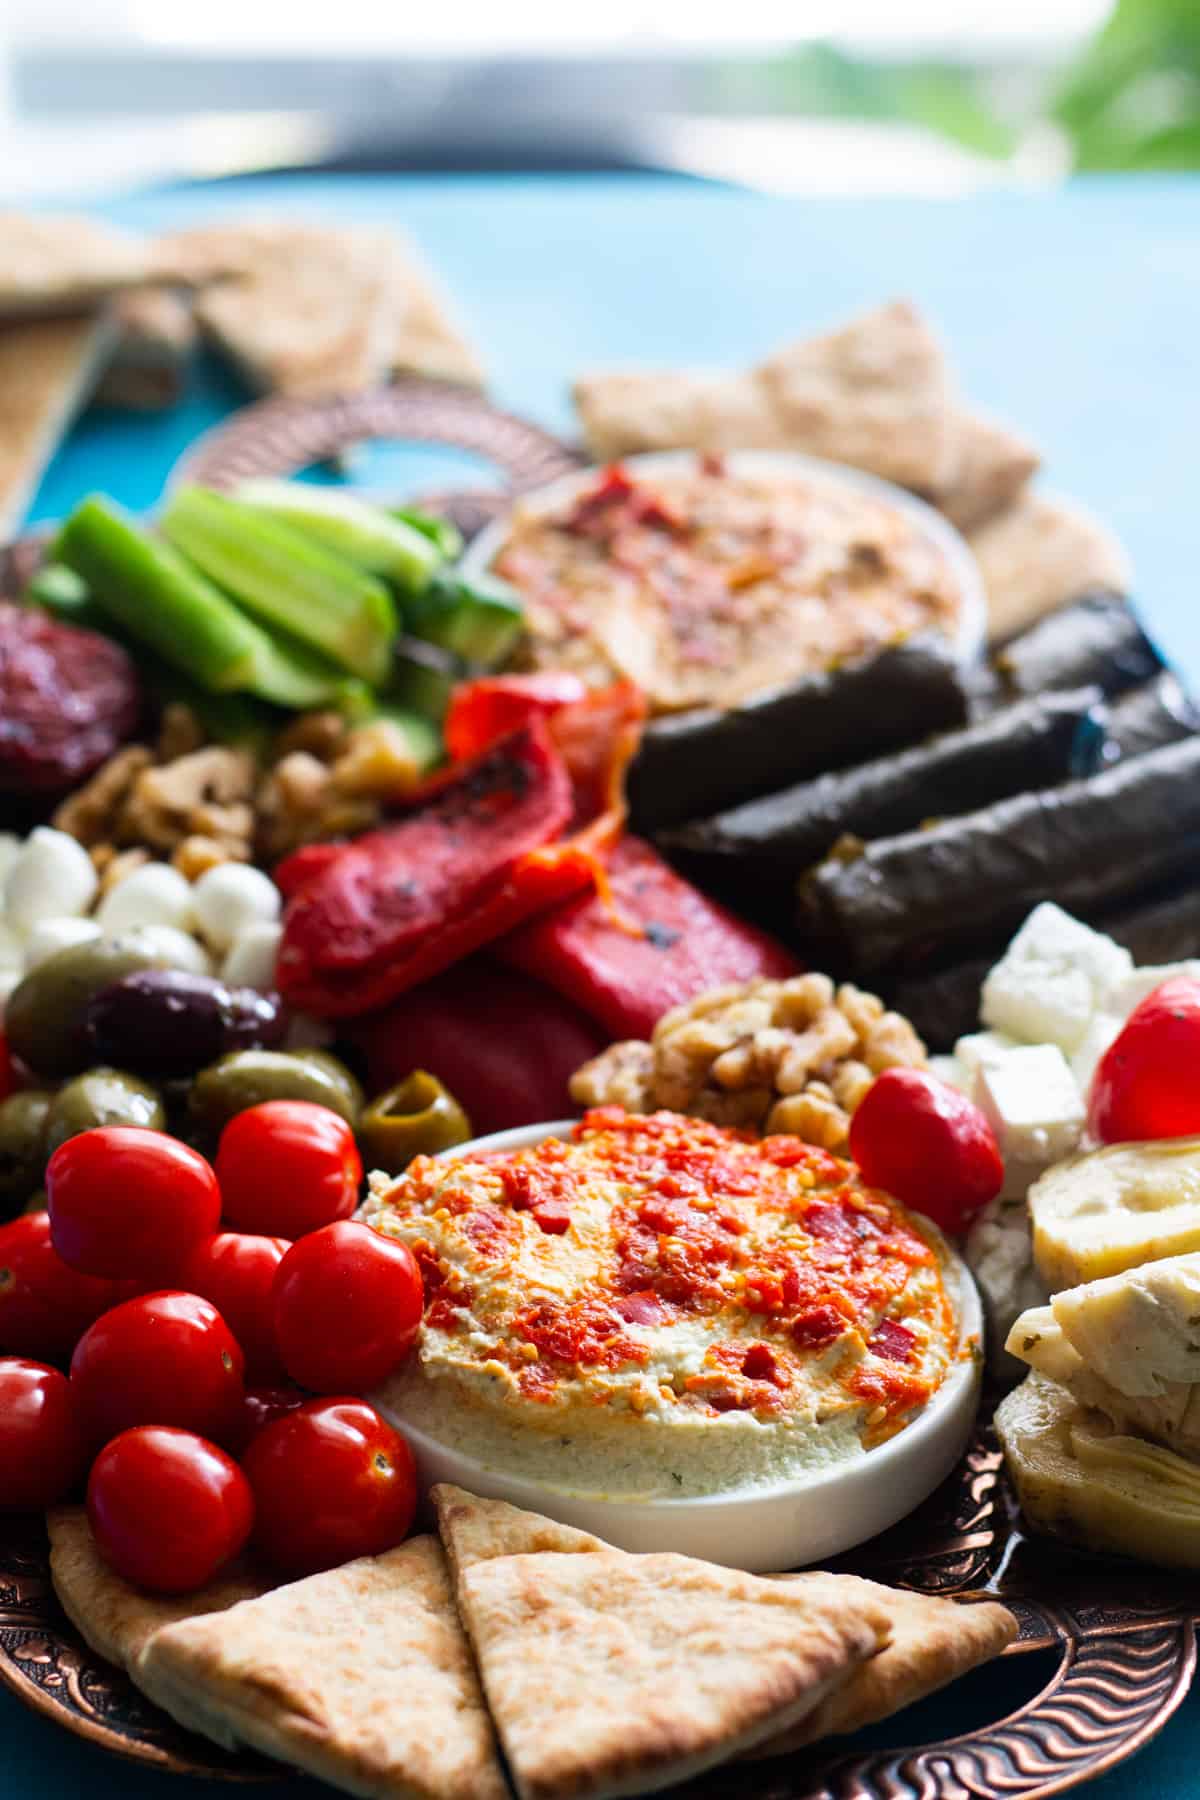 A Mediterranean platter with hummus, cheese, olives and other items.